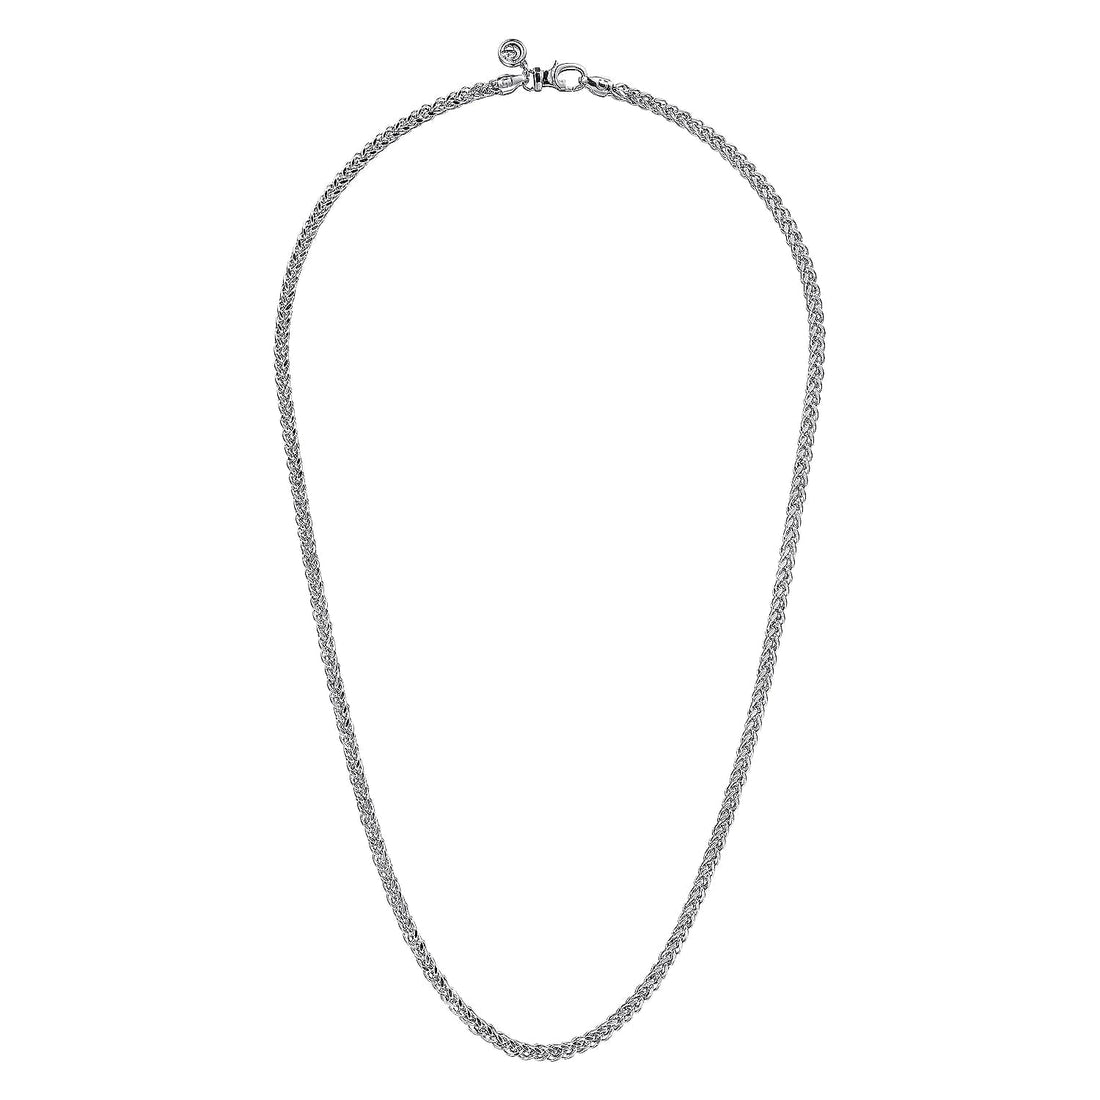 4mm Stainless Steel Round Franco Wheat Chain Necklace – The Steel Shop